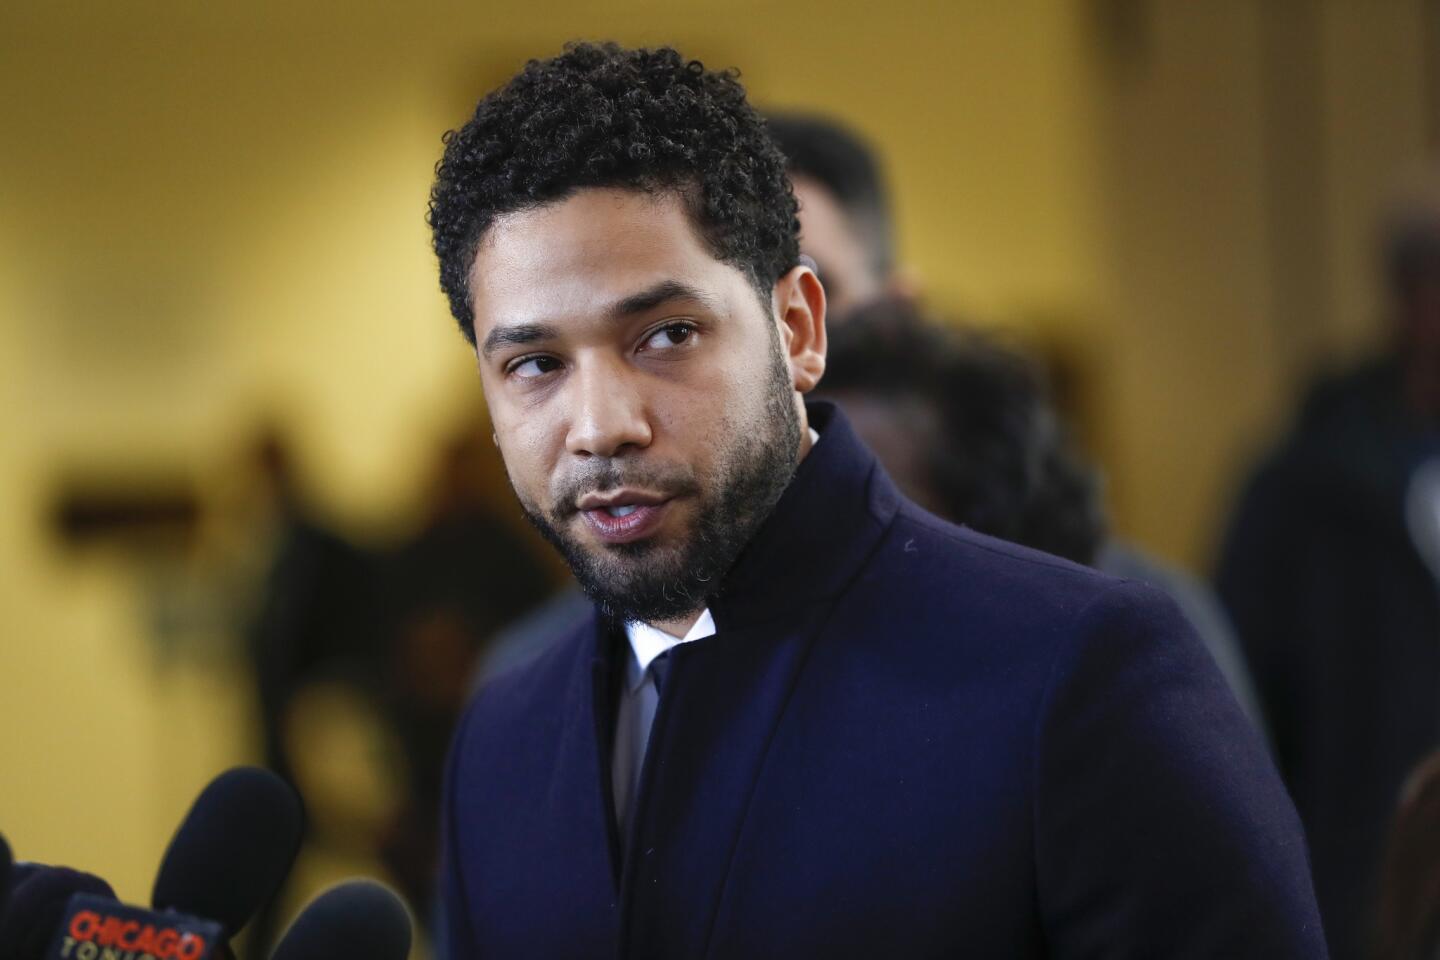 Jussie Smollett, the "Empire" star who has been charged for lying to police about an alleged fabricated attack, speaks to the media after all charges against him are dropped at the Leighton Criminal Court Building in Chicago on March 26, 2019.